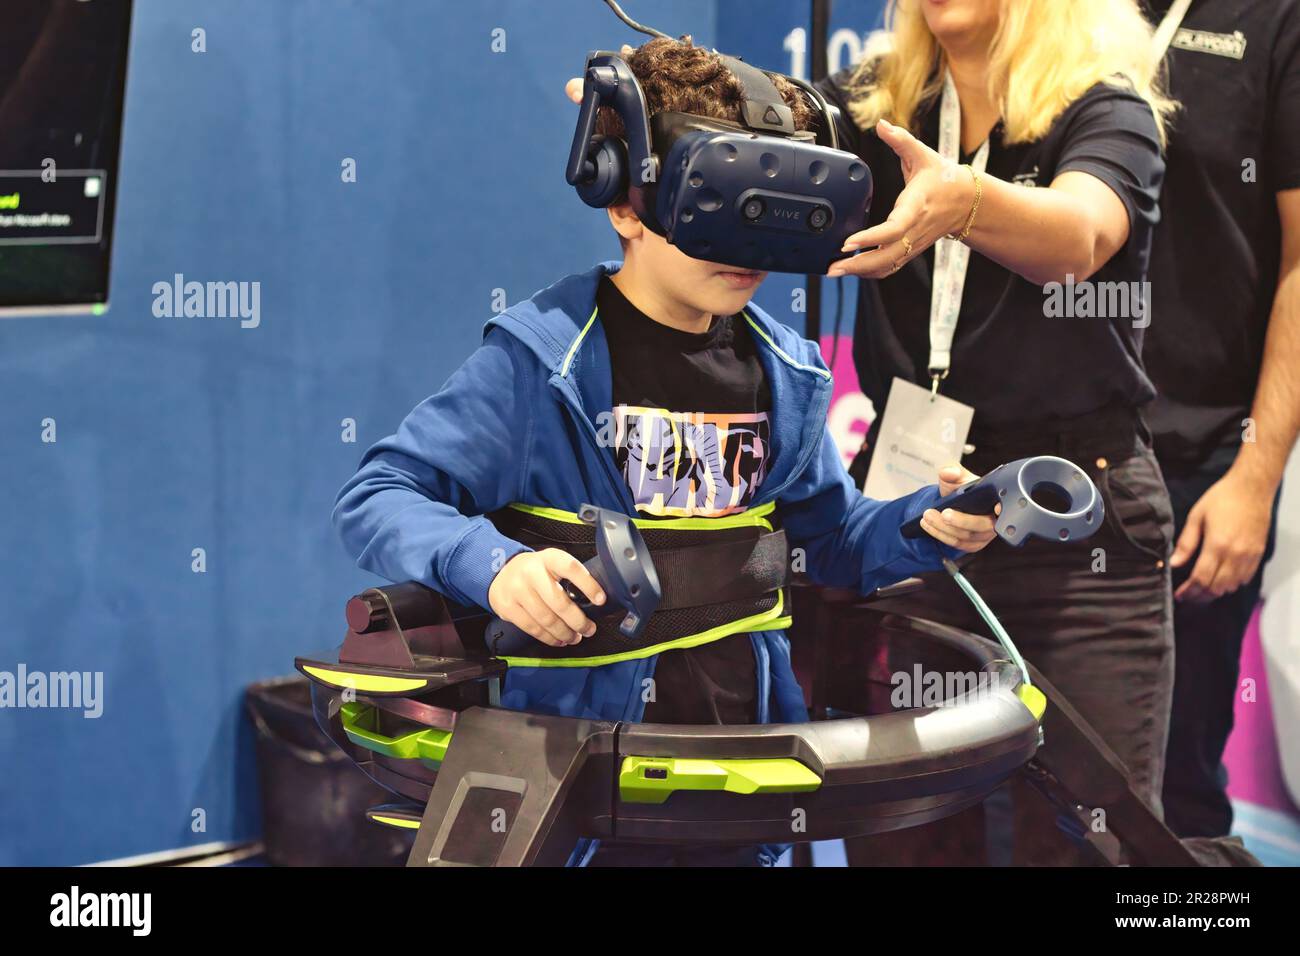 A young boy playing an immersive virtual reality treadmill machine with 360 degree headset and hand-controlled control pads Stock Photo